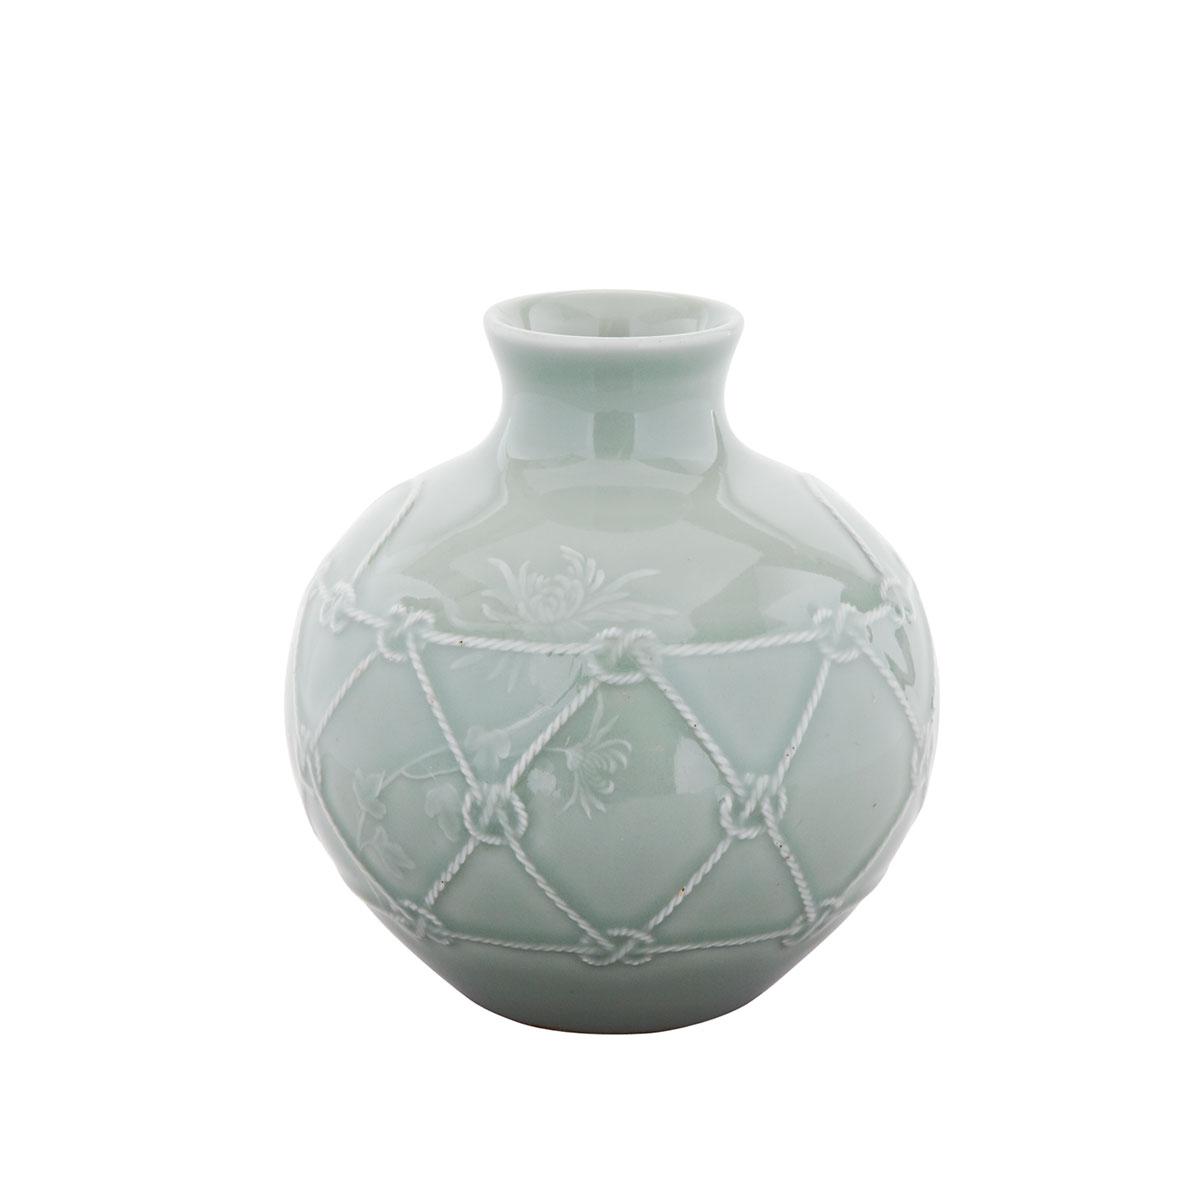 Celadon Moulded ‘Crab and Net’ Vase, Qianlong Mark and Period (1736-1795)